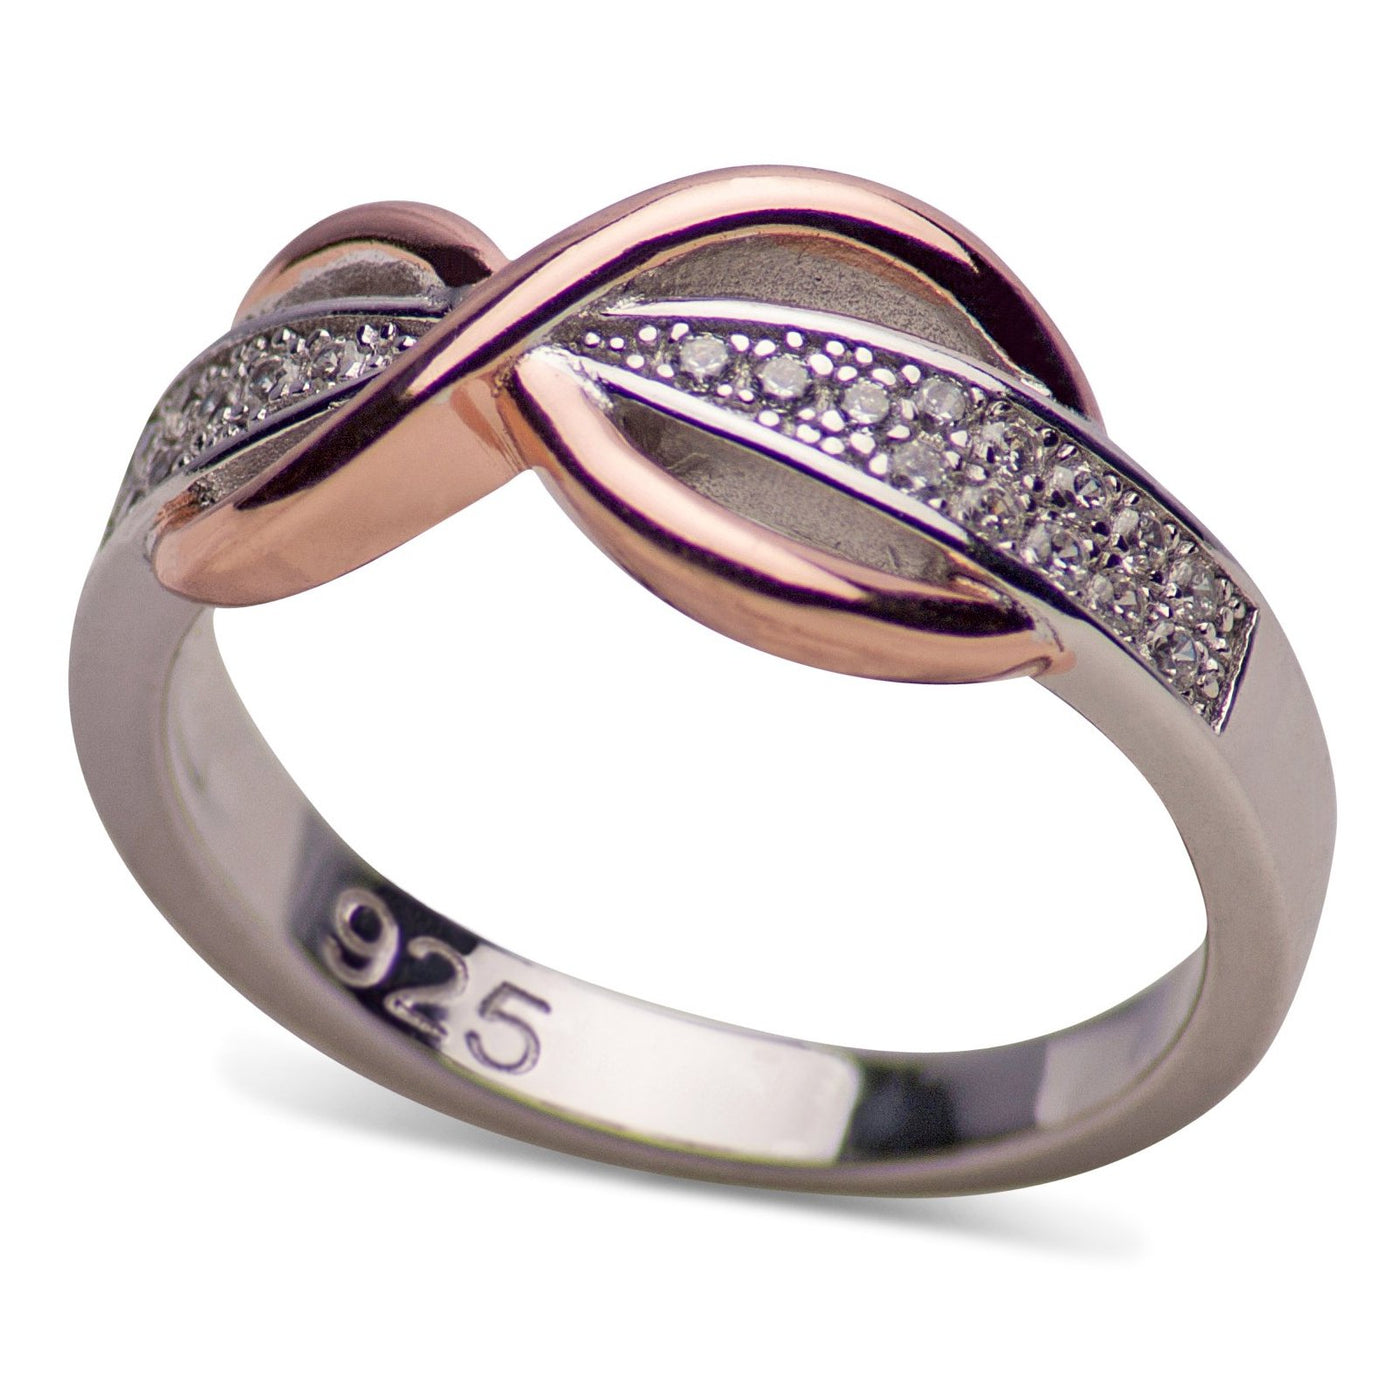 14K Rose Gold Plated Sterling Silver Two-Tone Pavé Infinity Ring